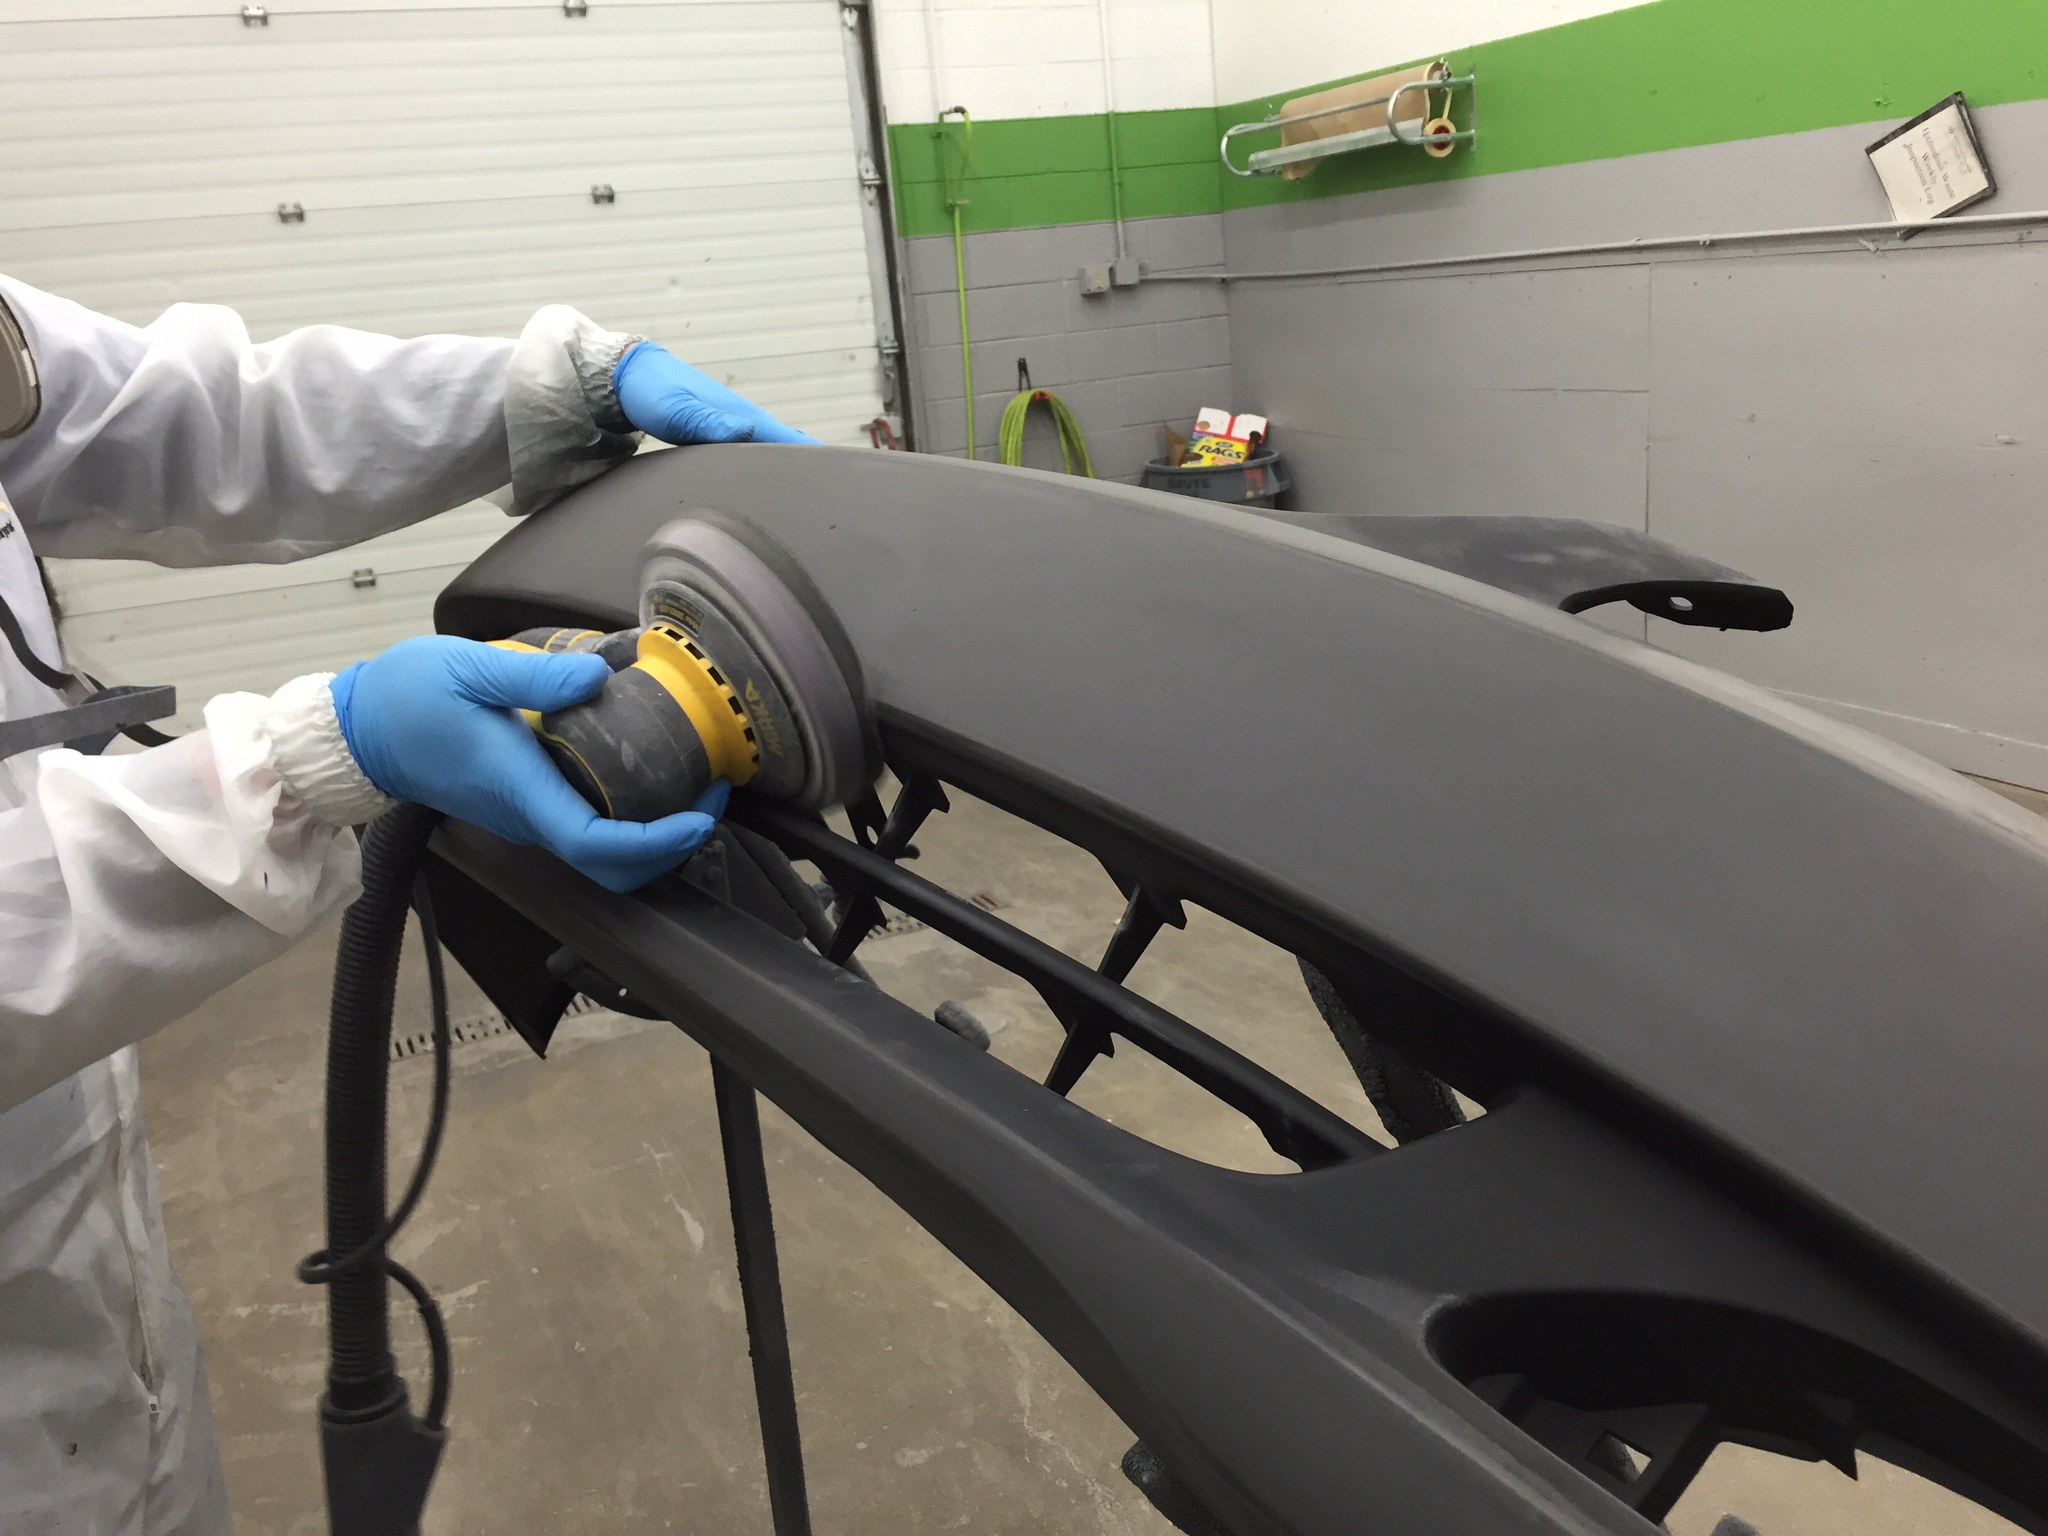 Advanced Collision Repair works to buff out and dents that will lower the quality of the vehicle.